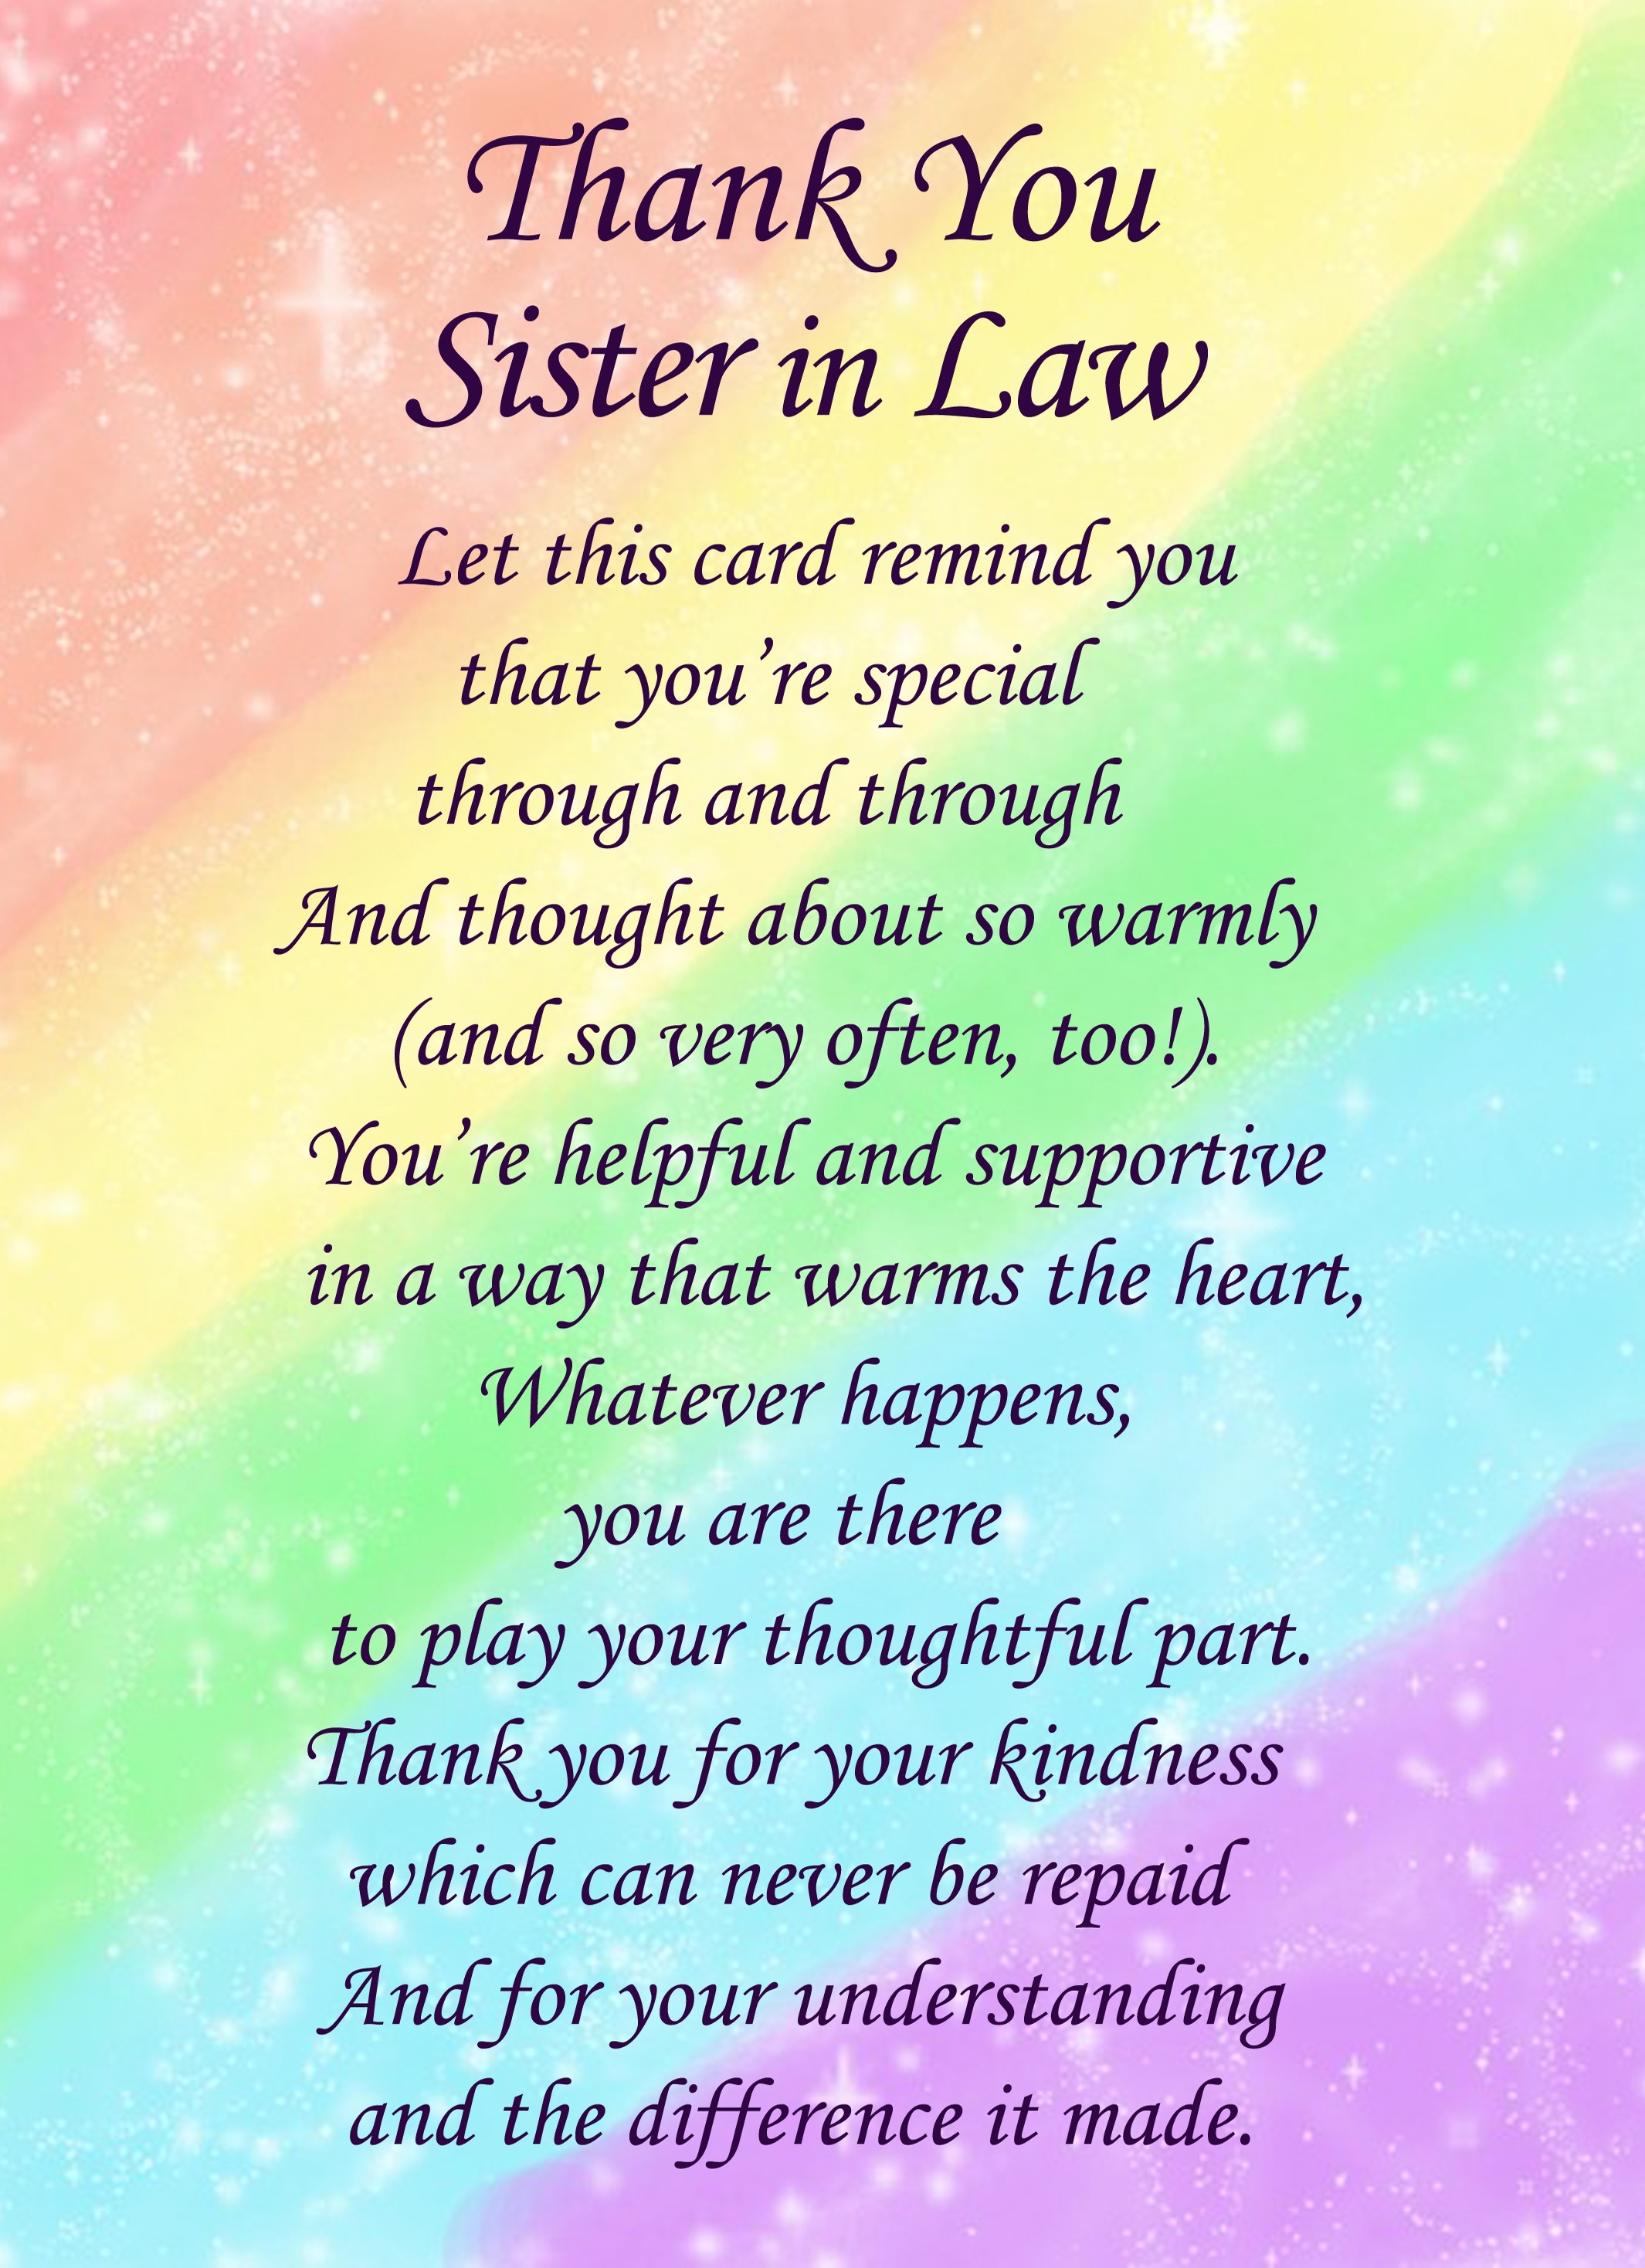 Thank You 'Sister in Law' Poem Verse Greeting Card